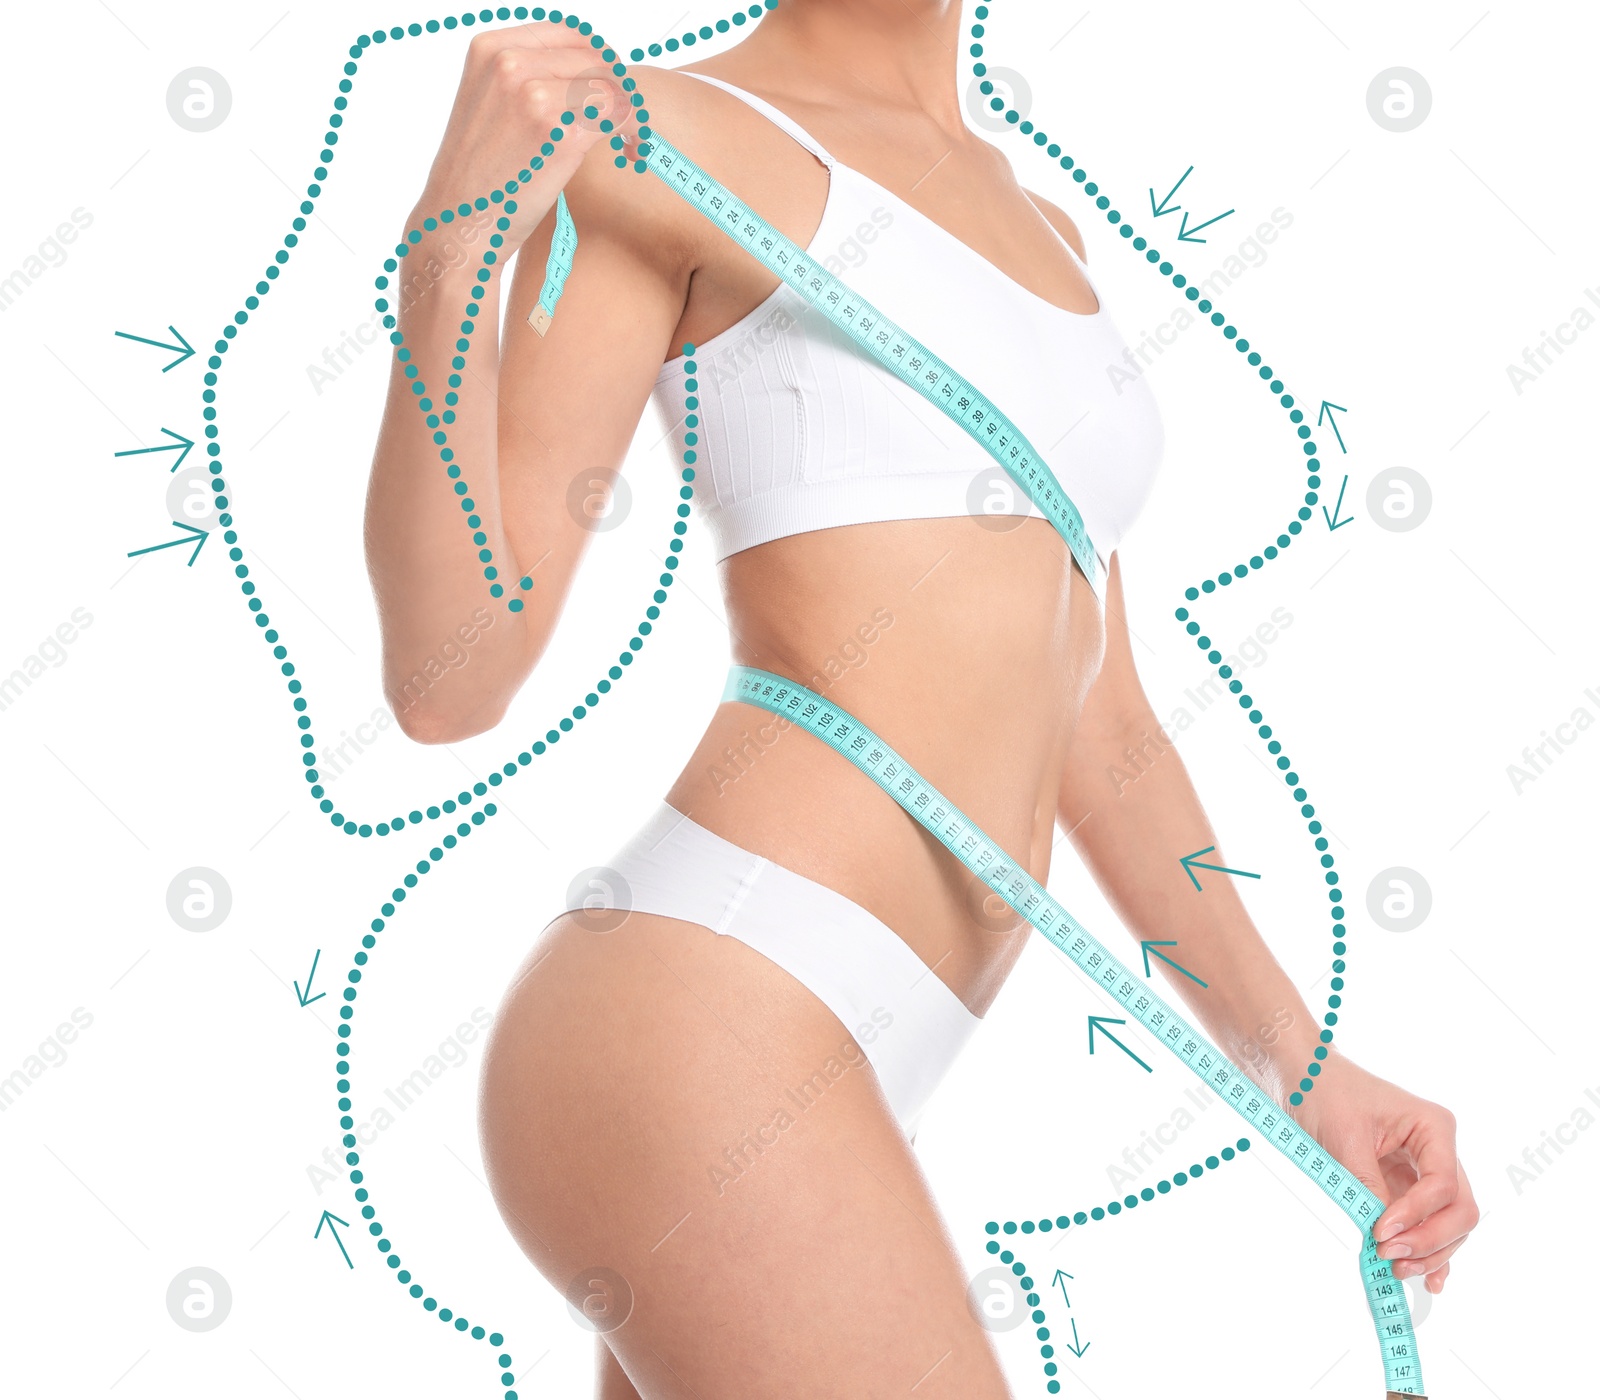 Image of Slim young woman after weight loss on white background, closeup view 